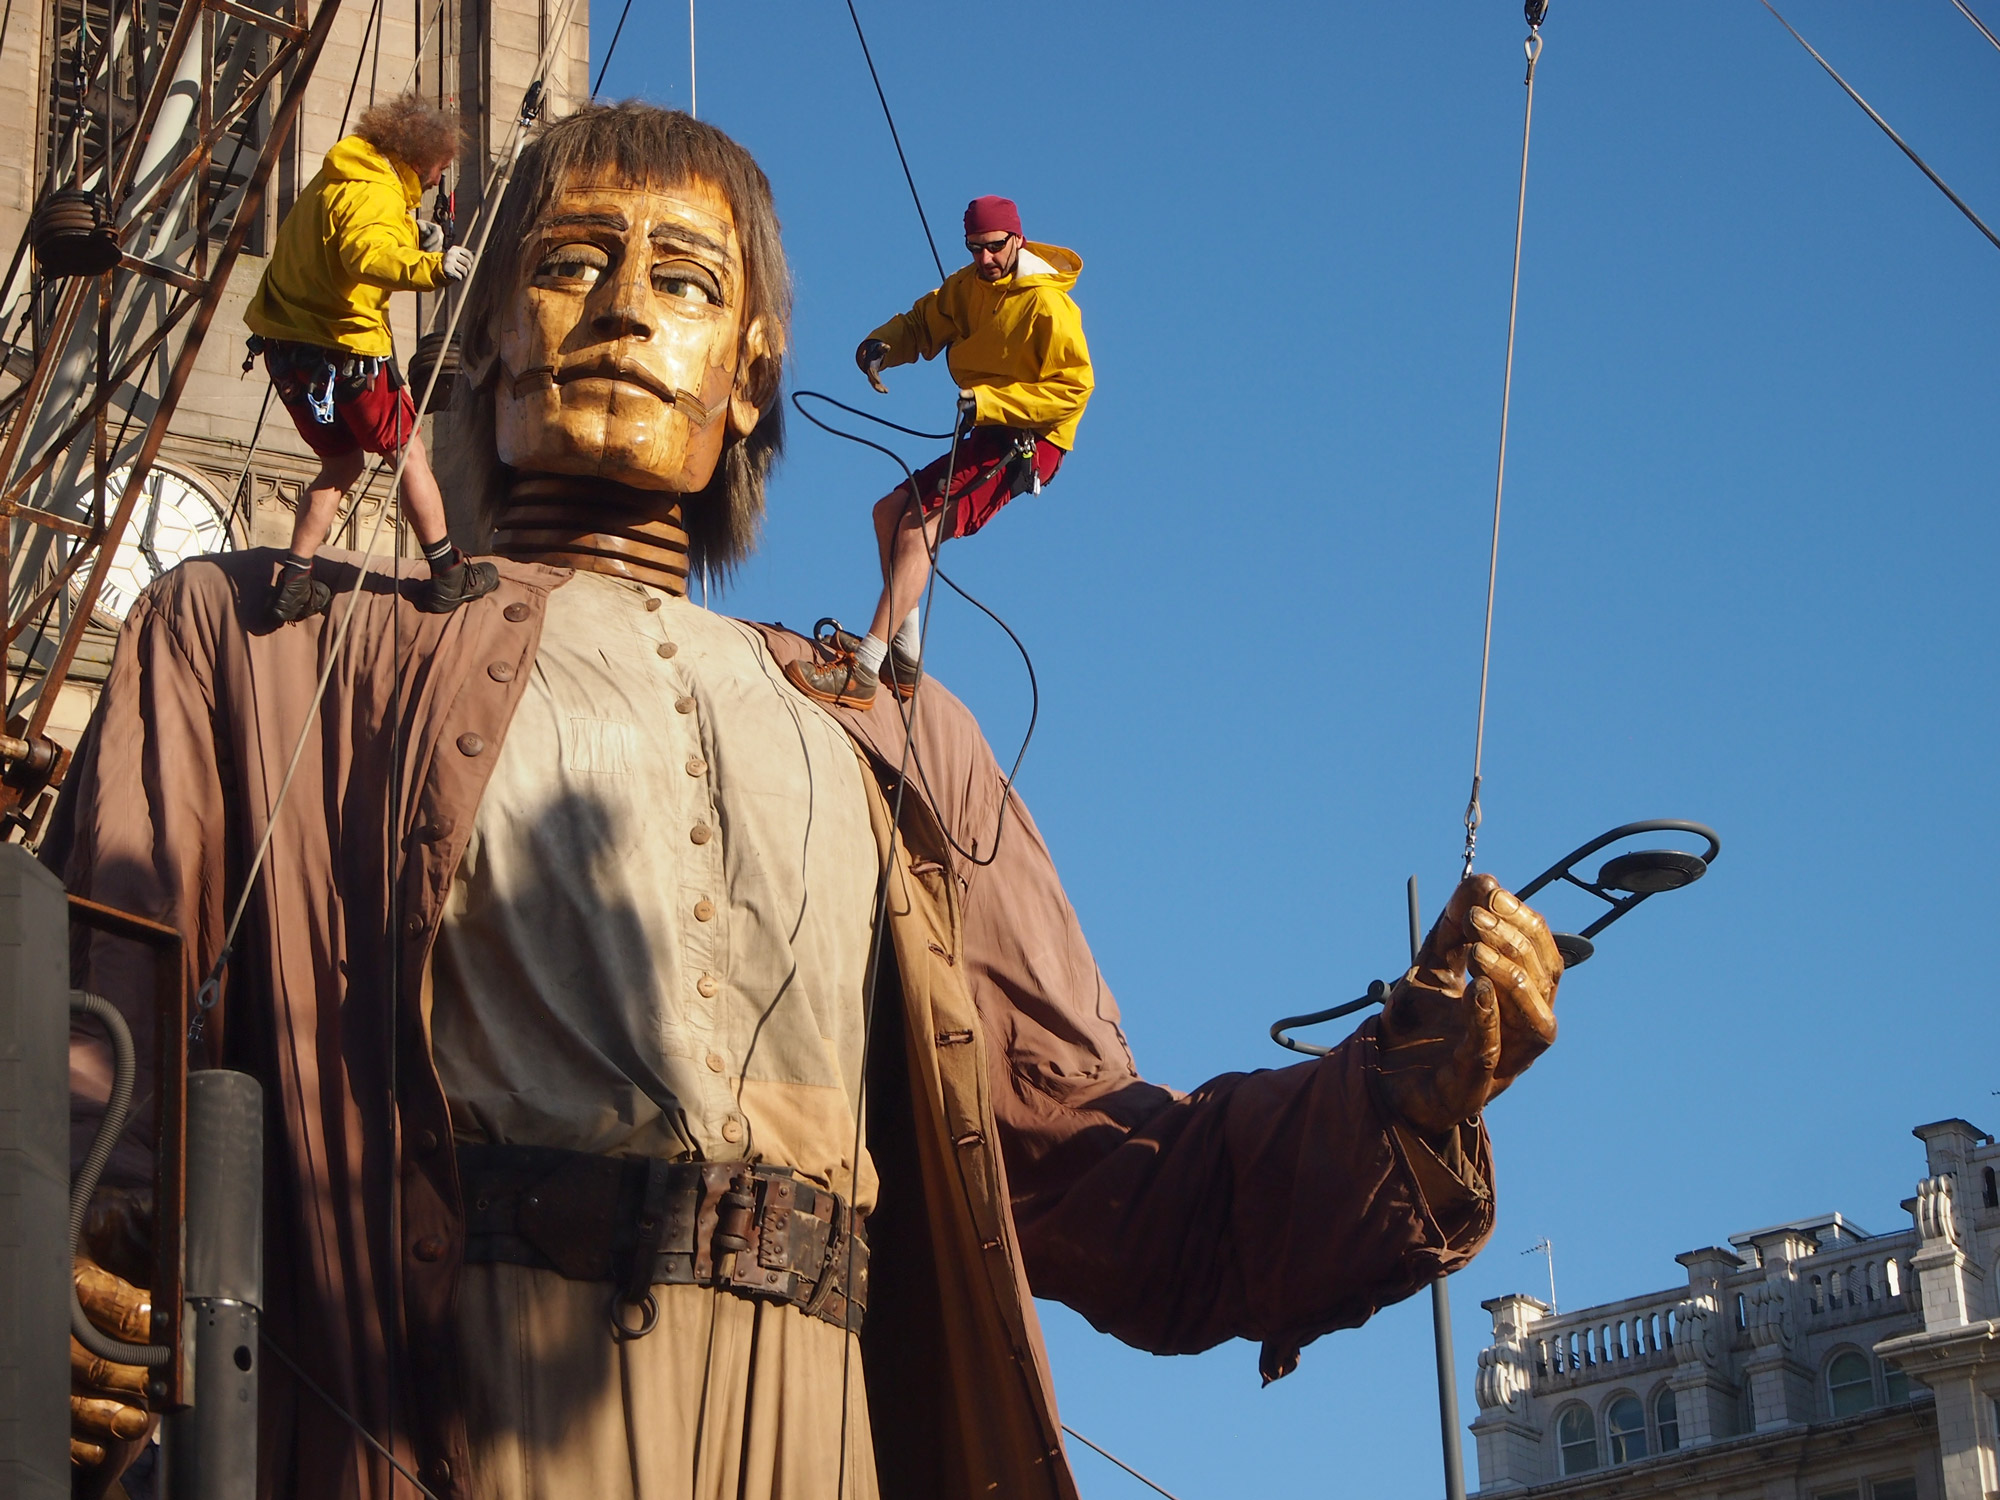 On a giant mannequin, two men hang on ropes. The giant appears to be looking at one of the men.